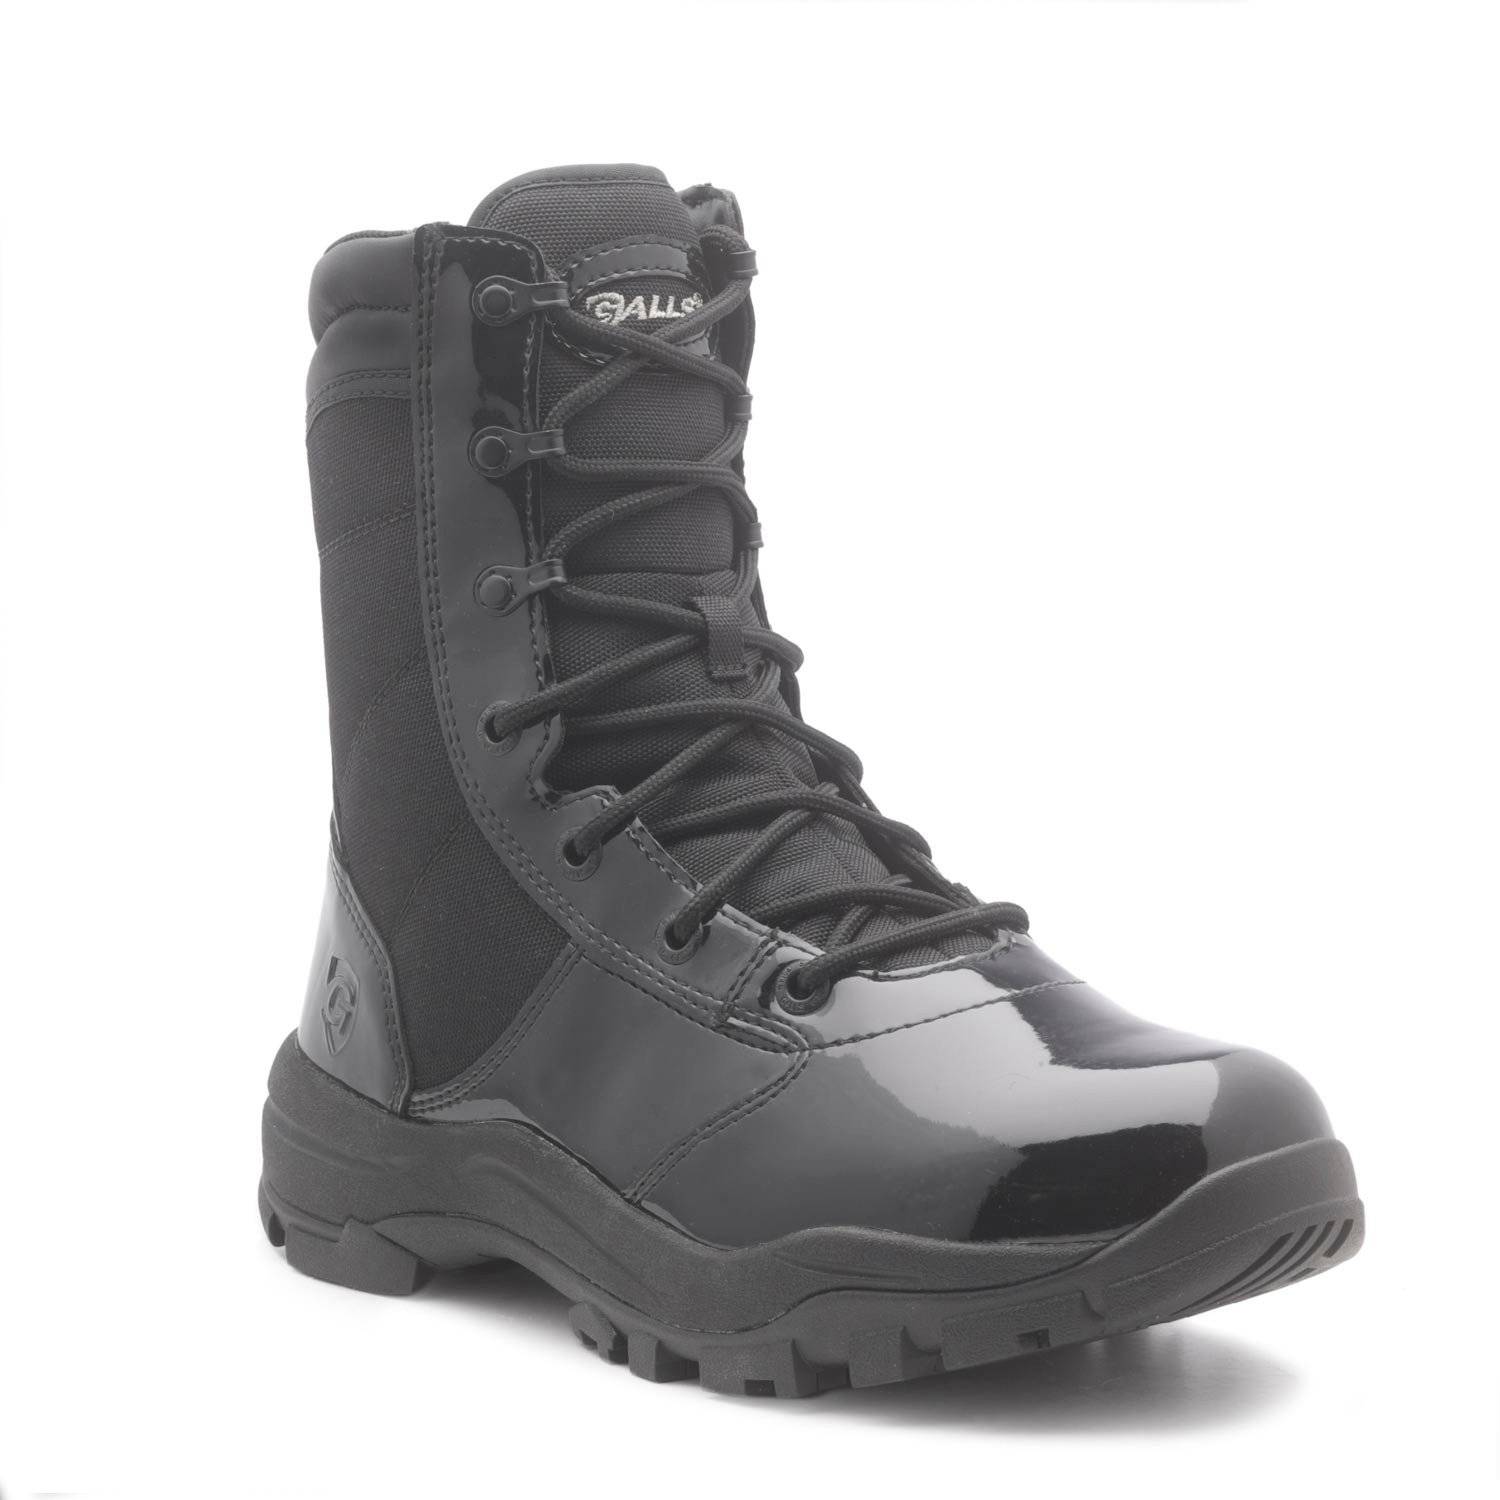 Duty Boots | Police Boots & Law Enforcement Boots